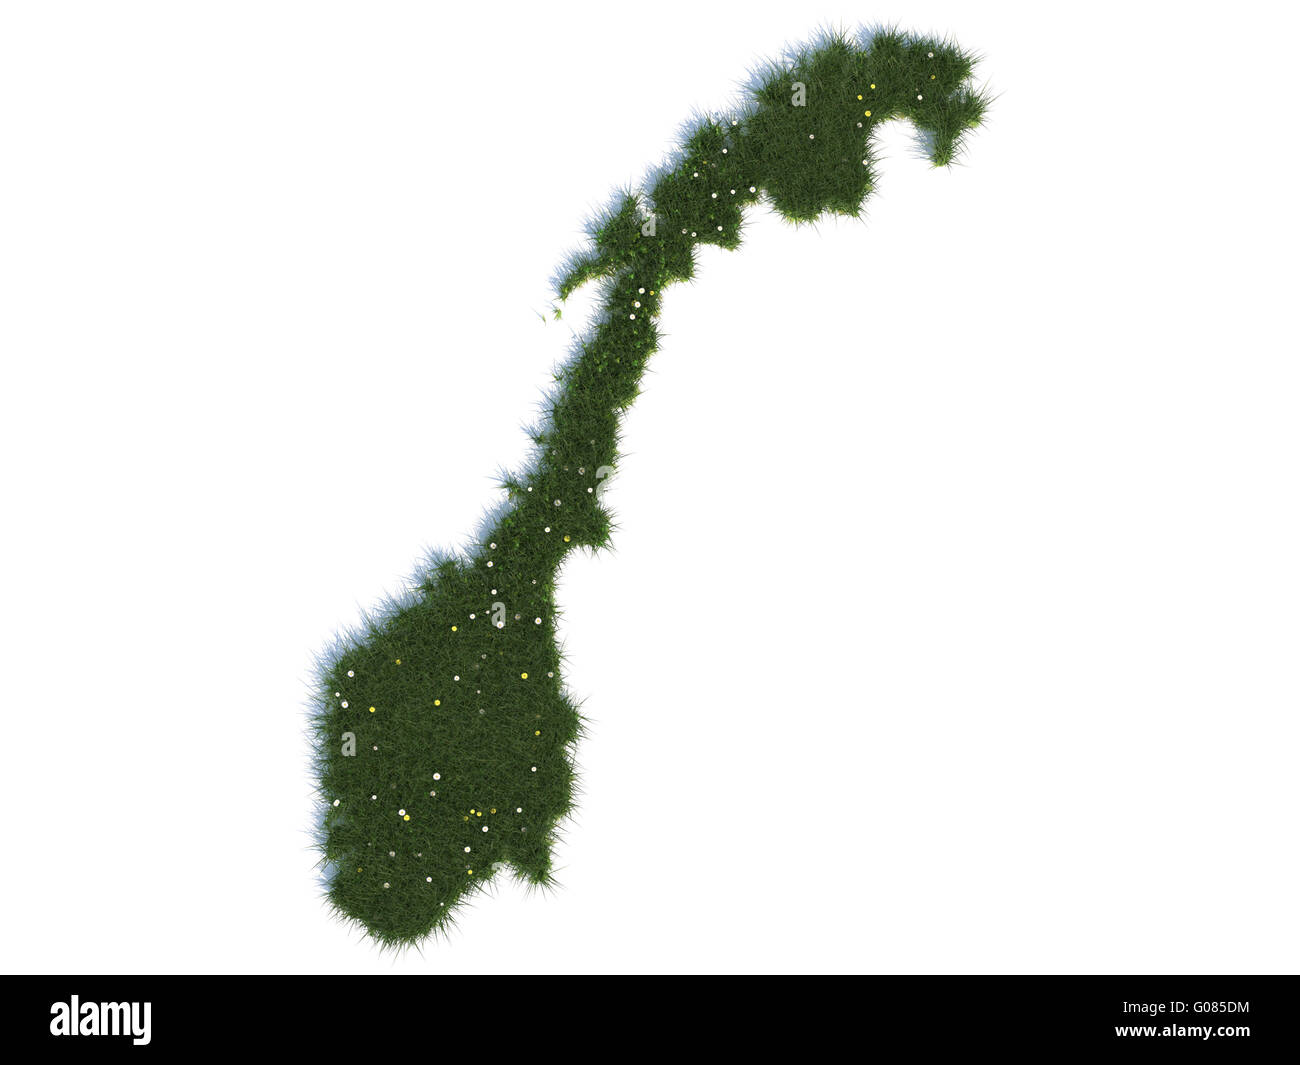 Map of Norway Series Countries out of realistic Grass Stock Photo